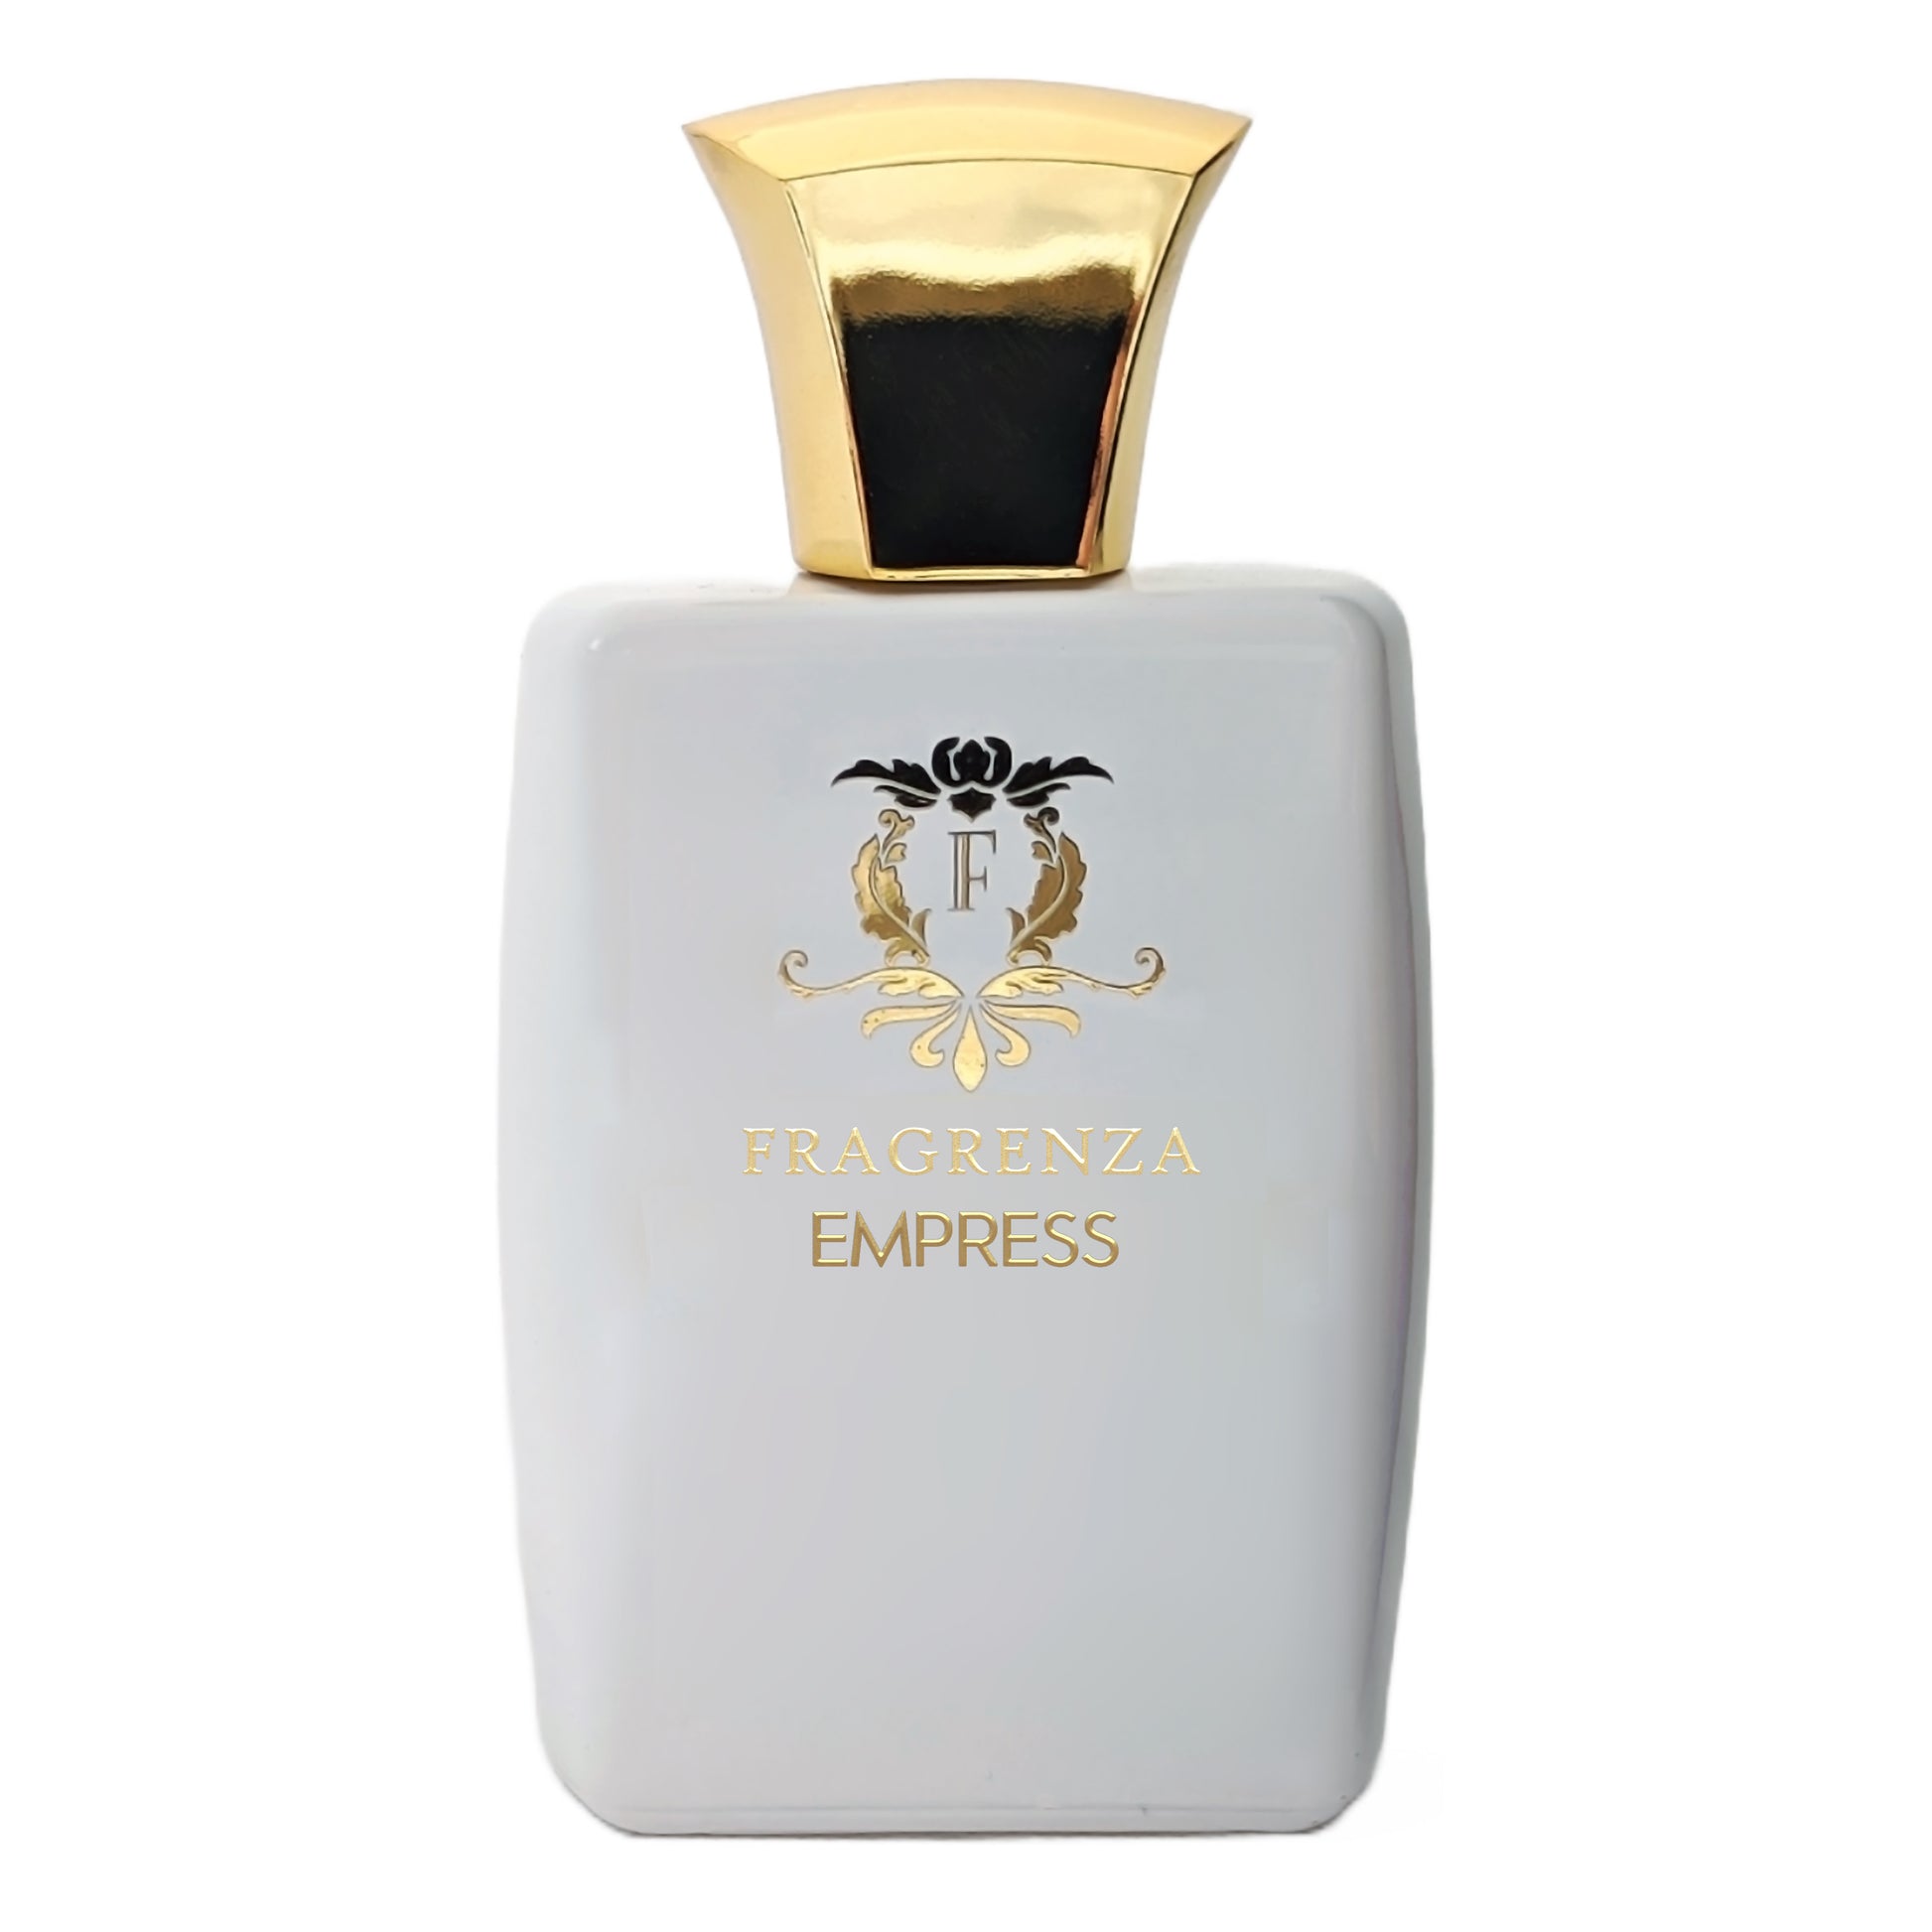 L'Imperatrice Limited Edition dupe